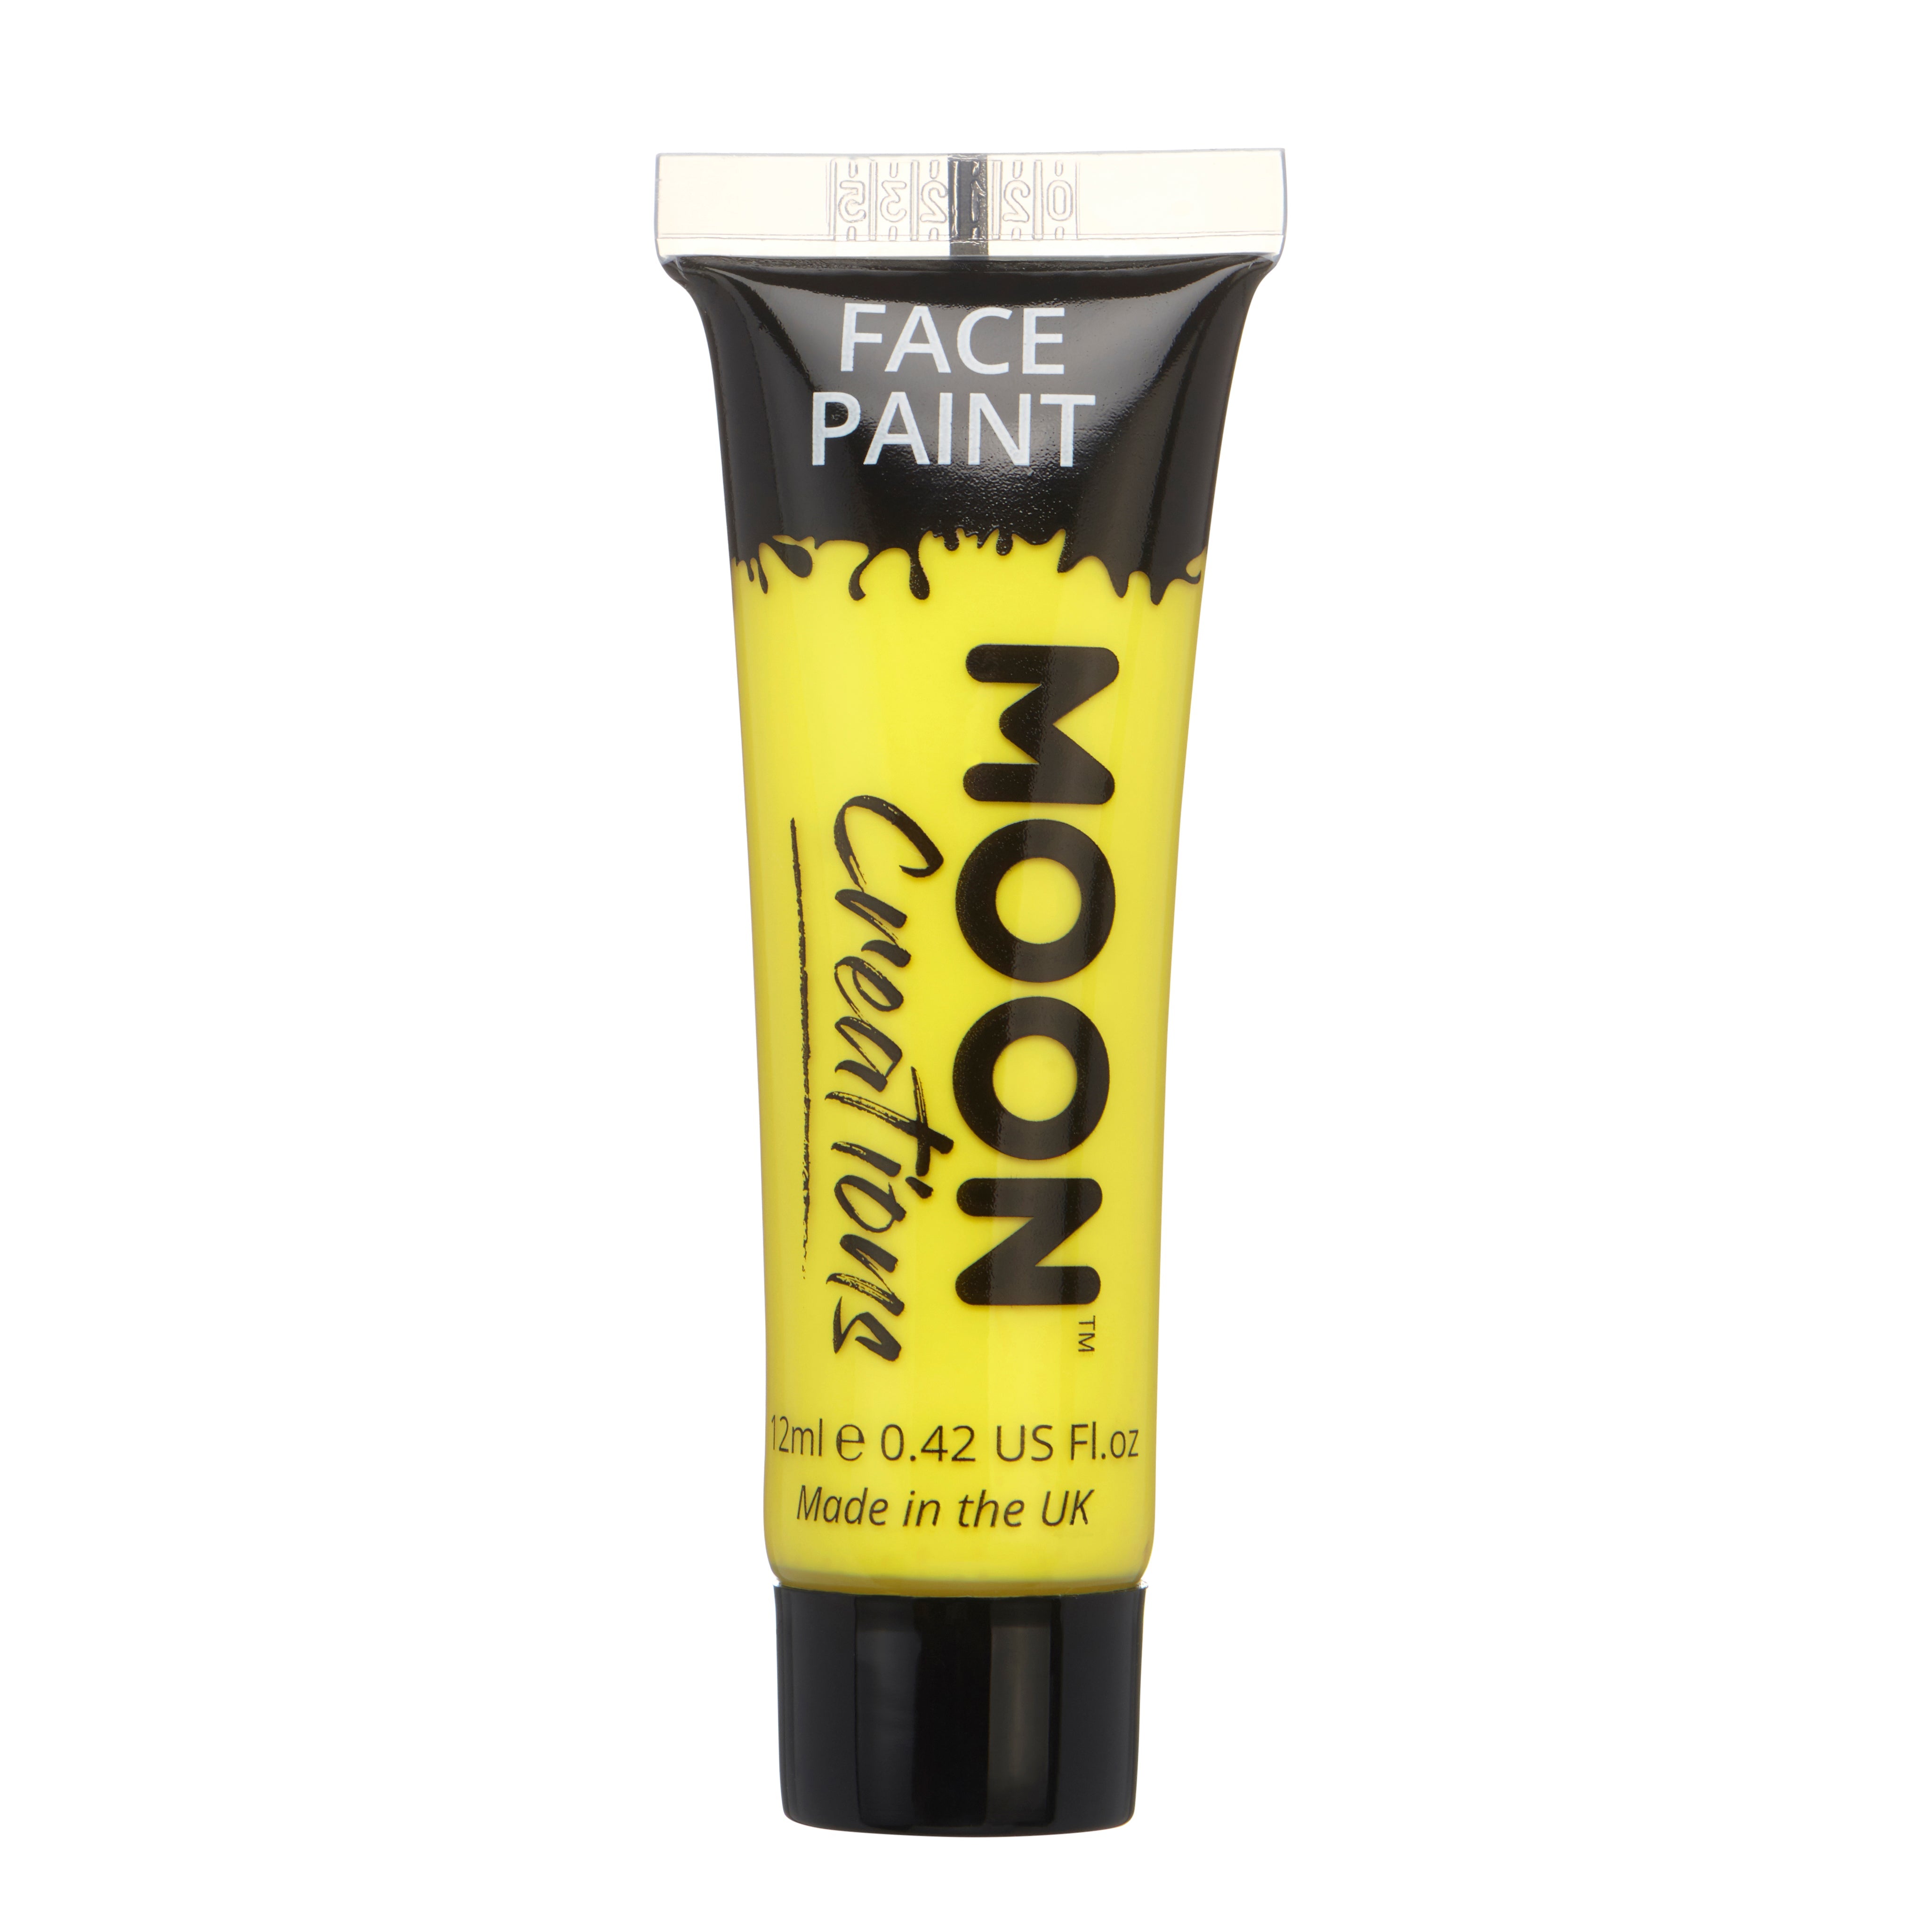 Yellow - Face & Body Paint Makeup, 12mL. Cosmetically certified, FDA & Health Canada compliant, cruelty free and vegan.